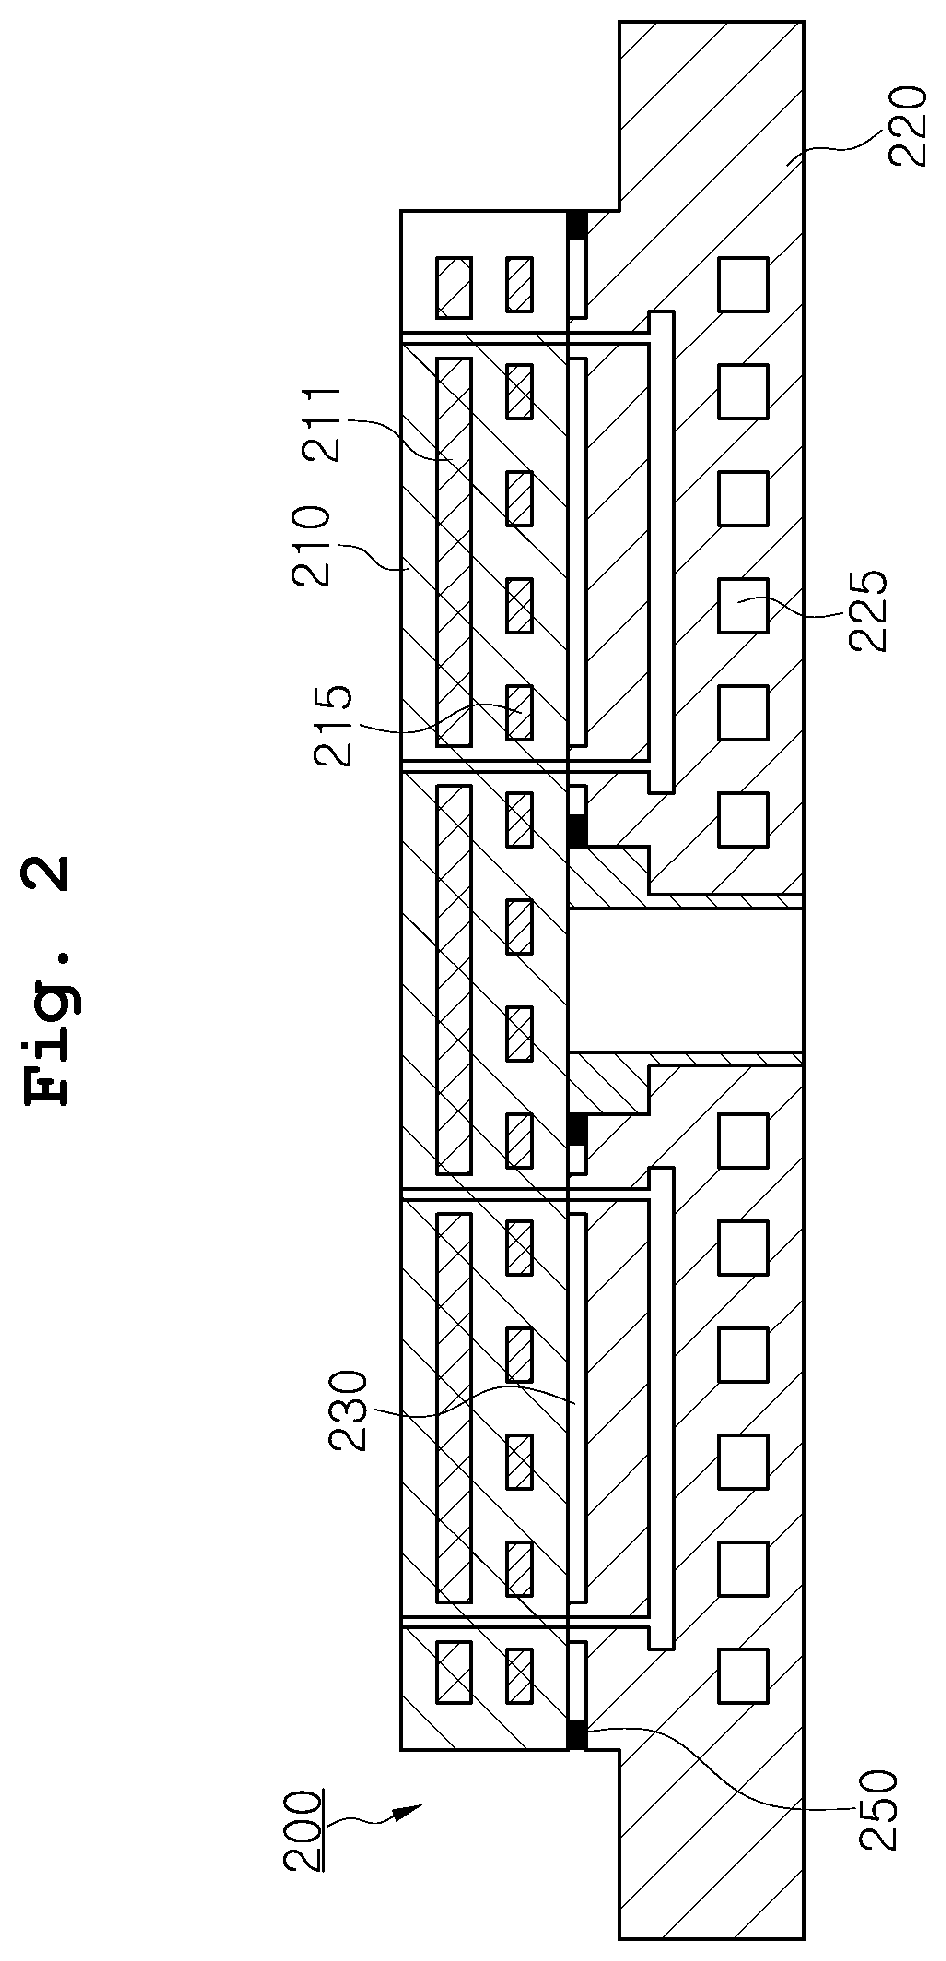 Substrate processing apparatus and method of fabricating same